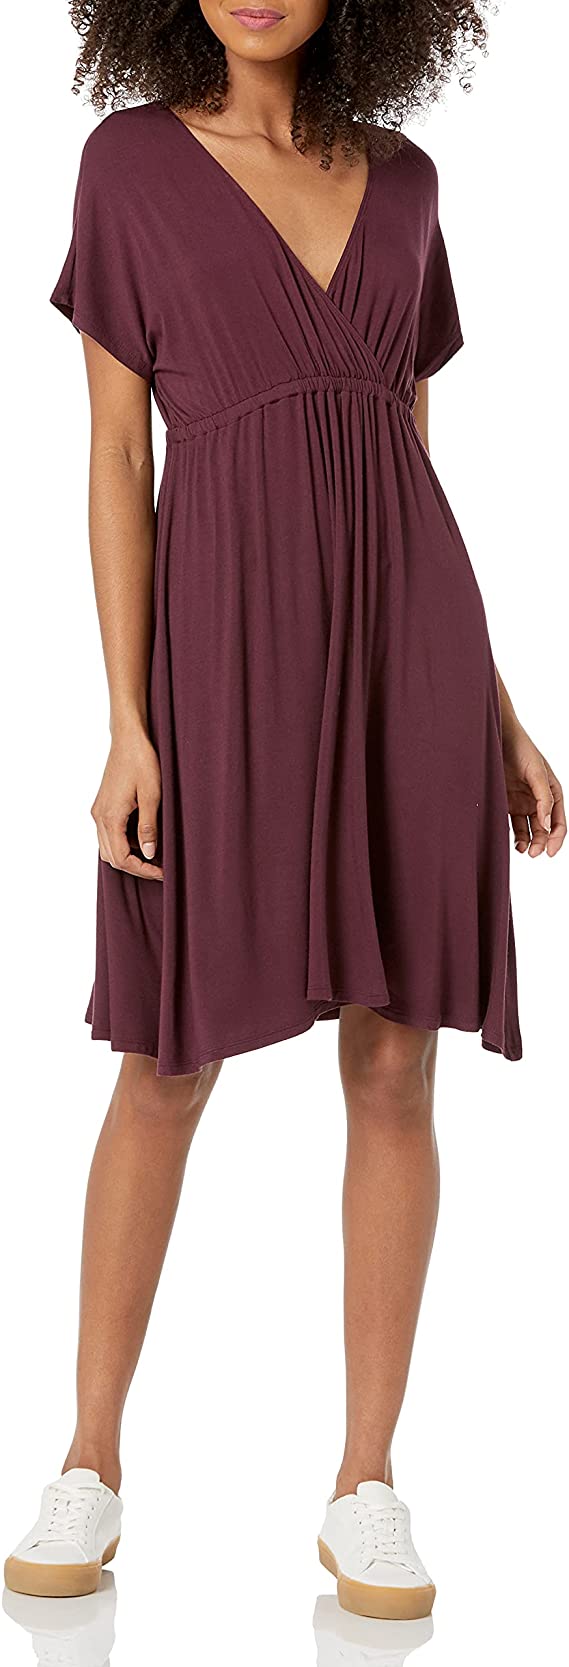 Amazon Essentials Jersey V-Neck Surplice Fitted Dress For Women